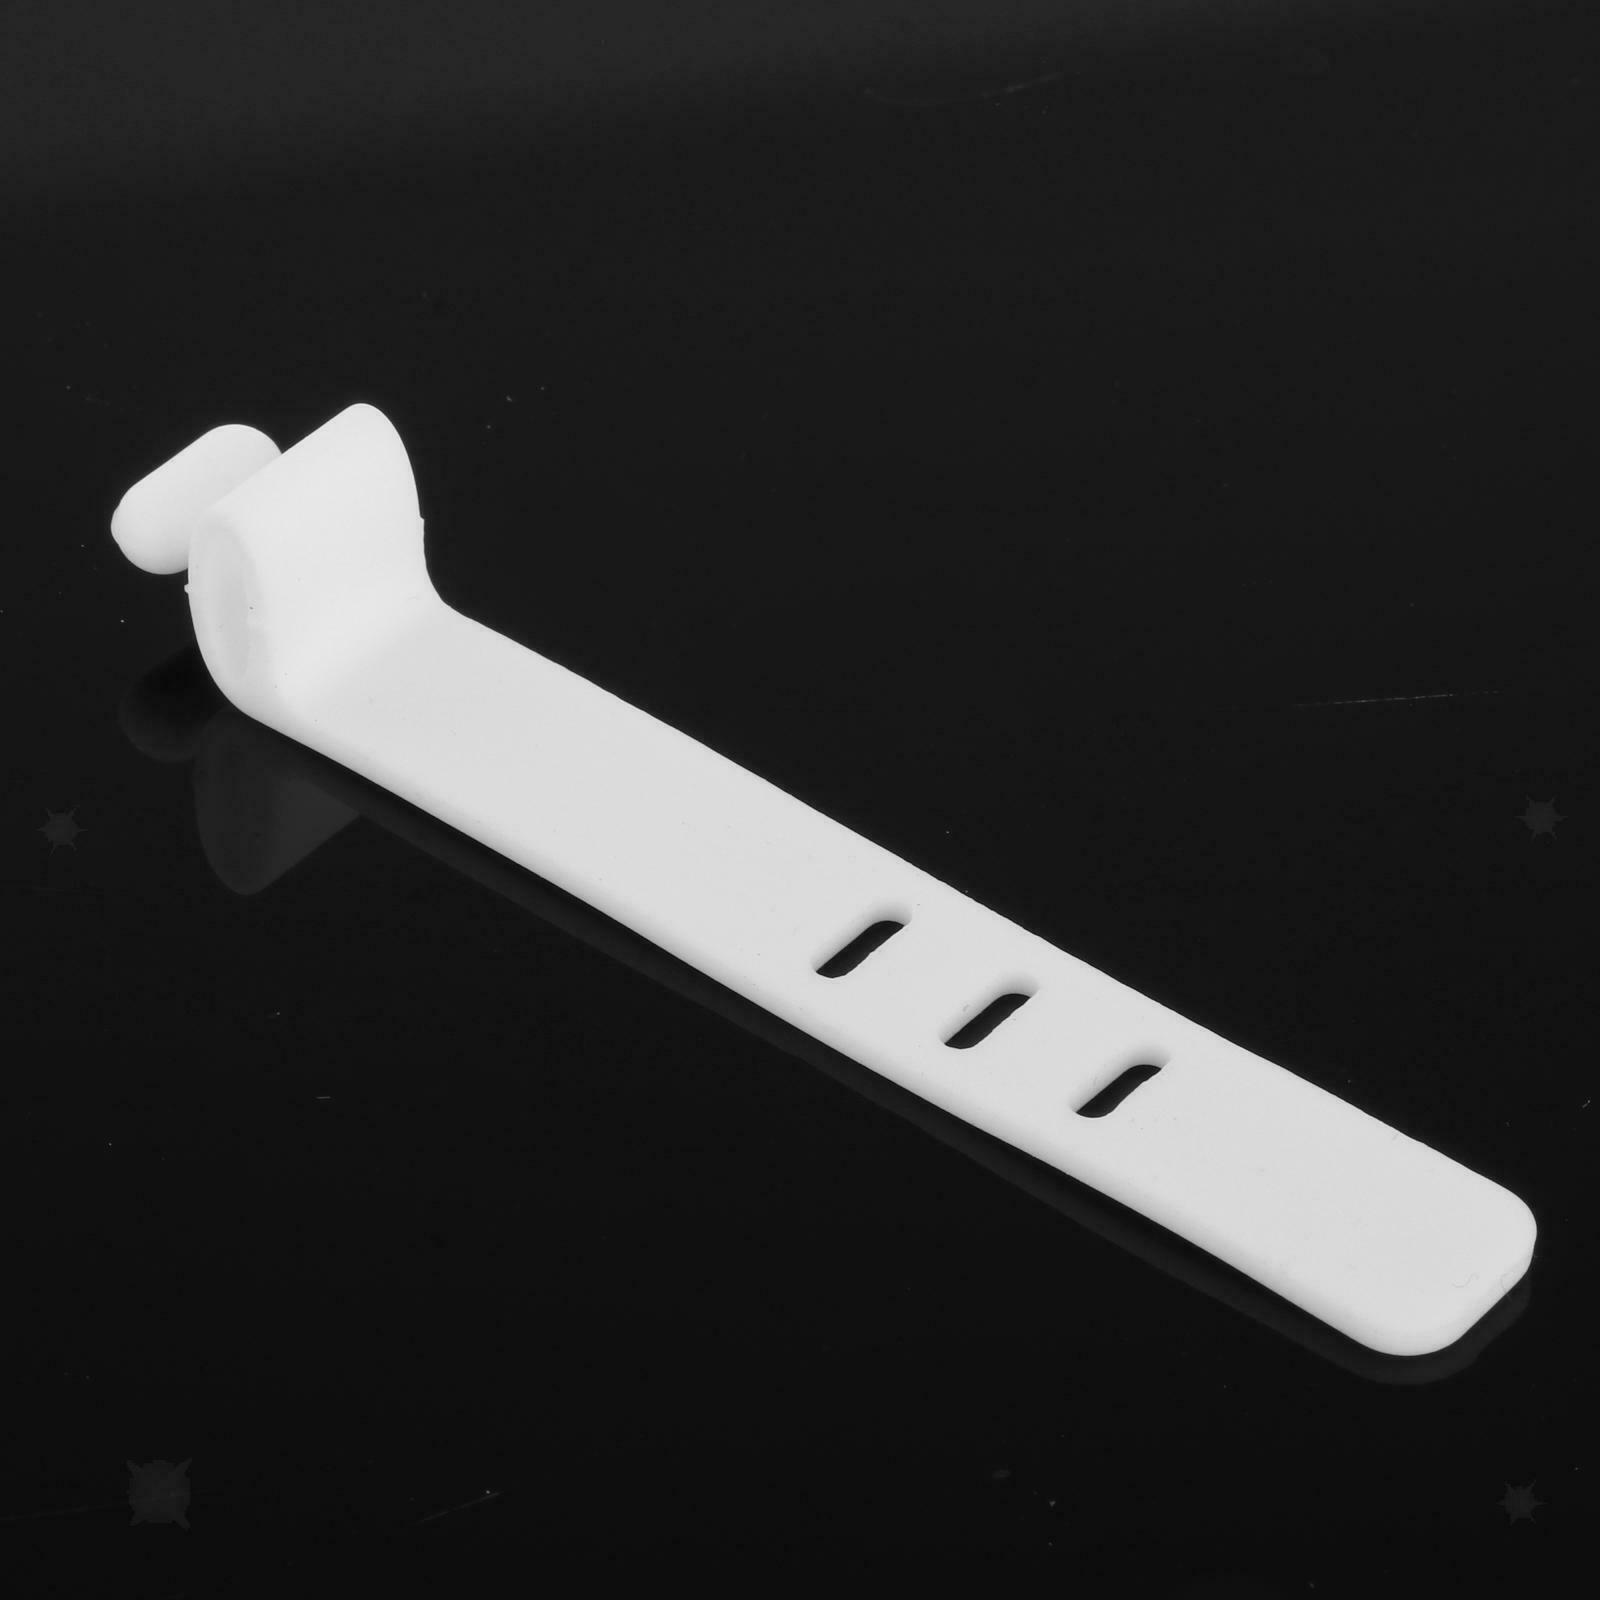 10 Pack Silicone Cable Ties 3 Holes Wire Organizer for Data Cable Desk